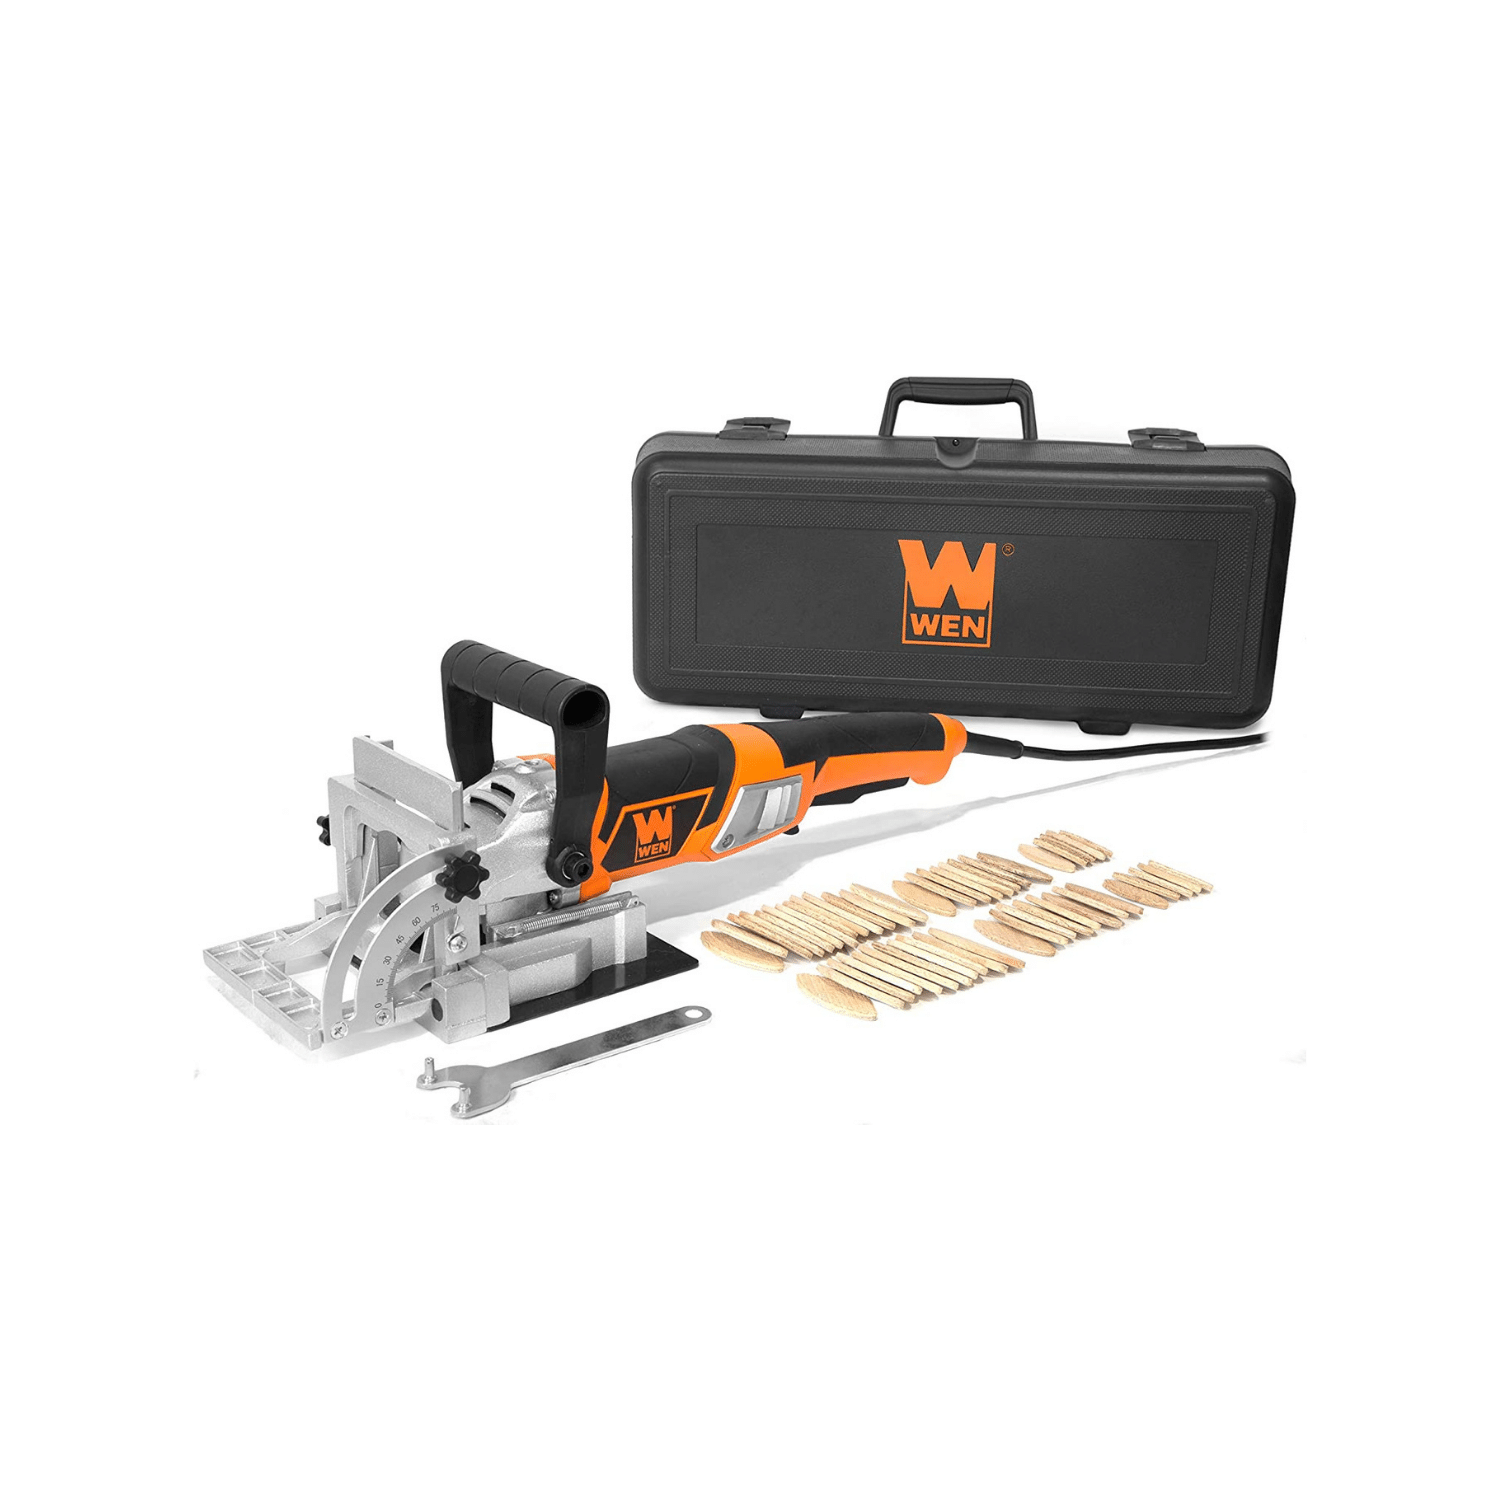 Wen JN8504 8.5-Amp Plate and Biscuit Joiner with Case and Biscuits